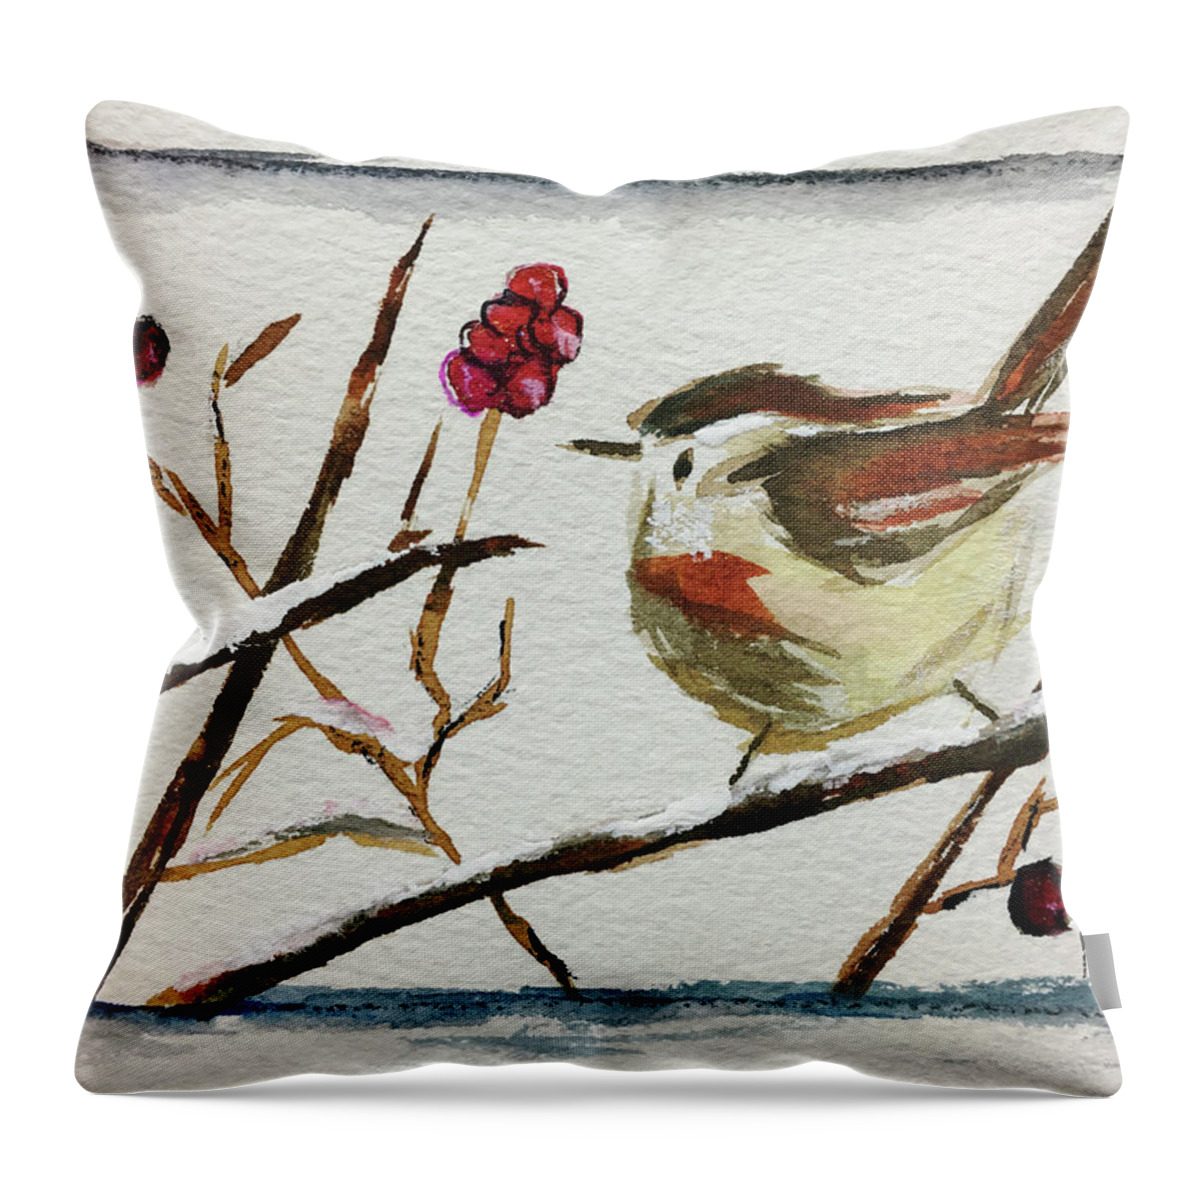 Fairy Wren Throw Pillow featuring the painting Fairy with Berries by Roxy Rich